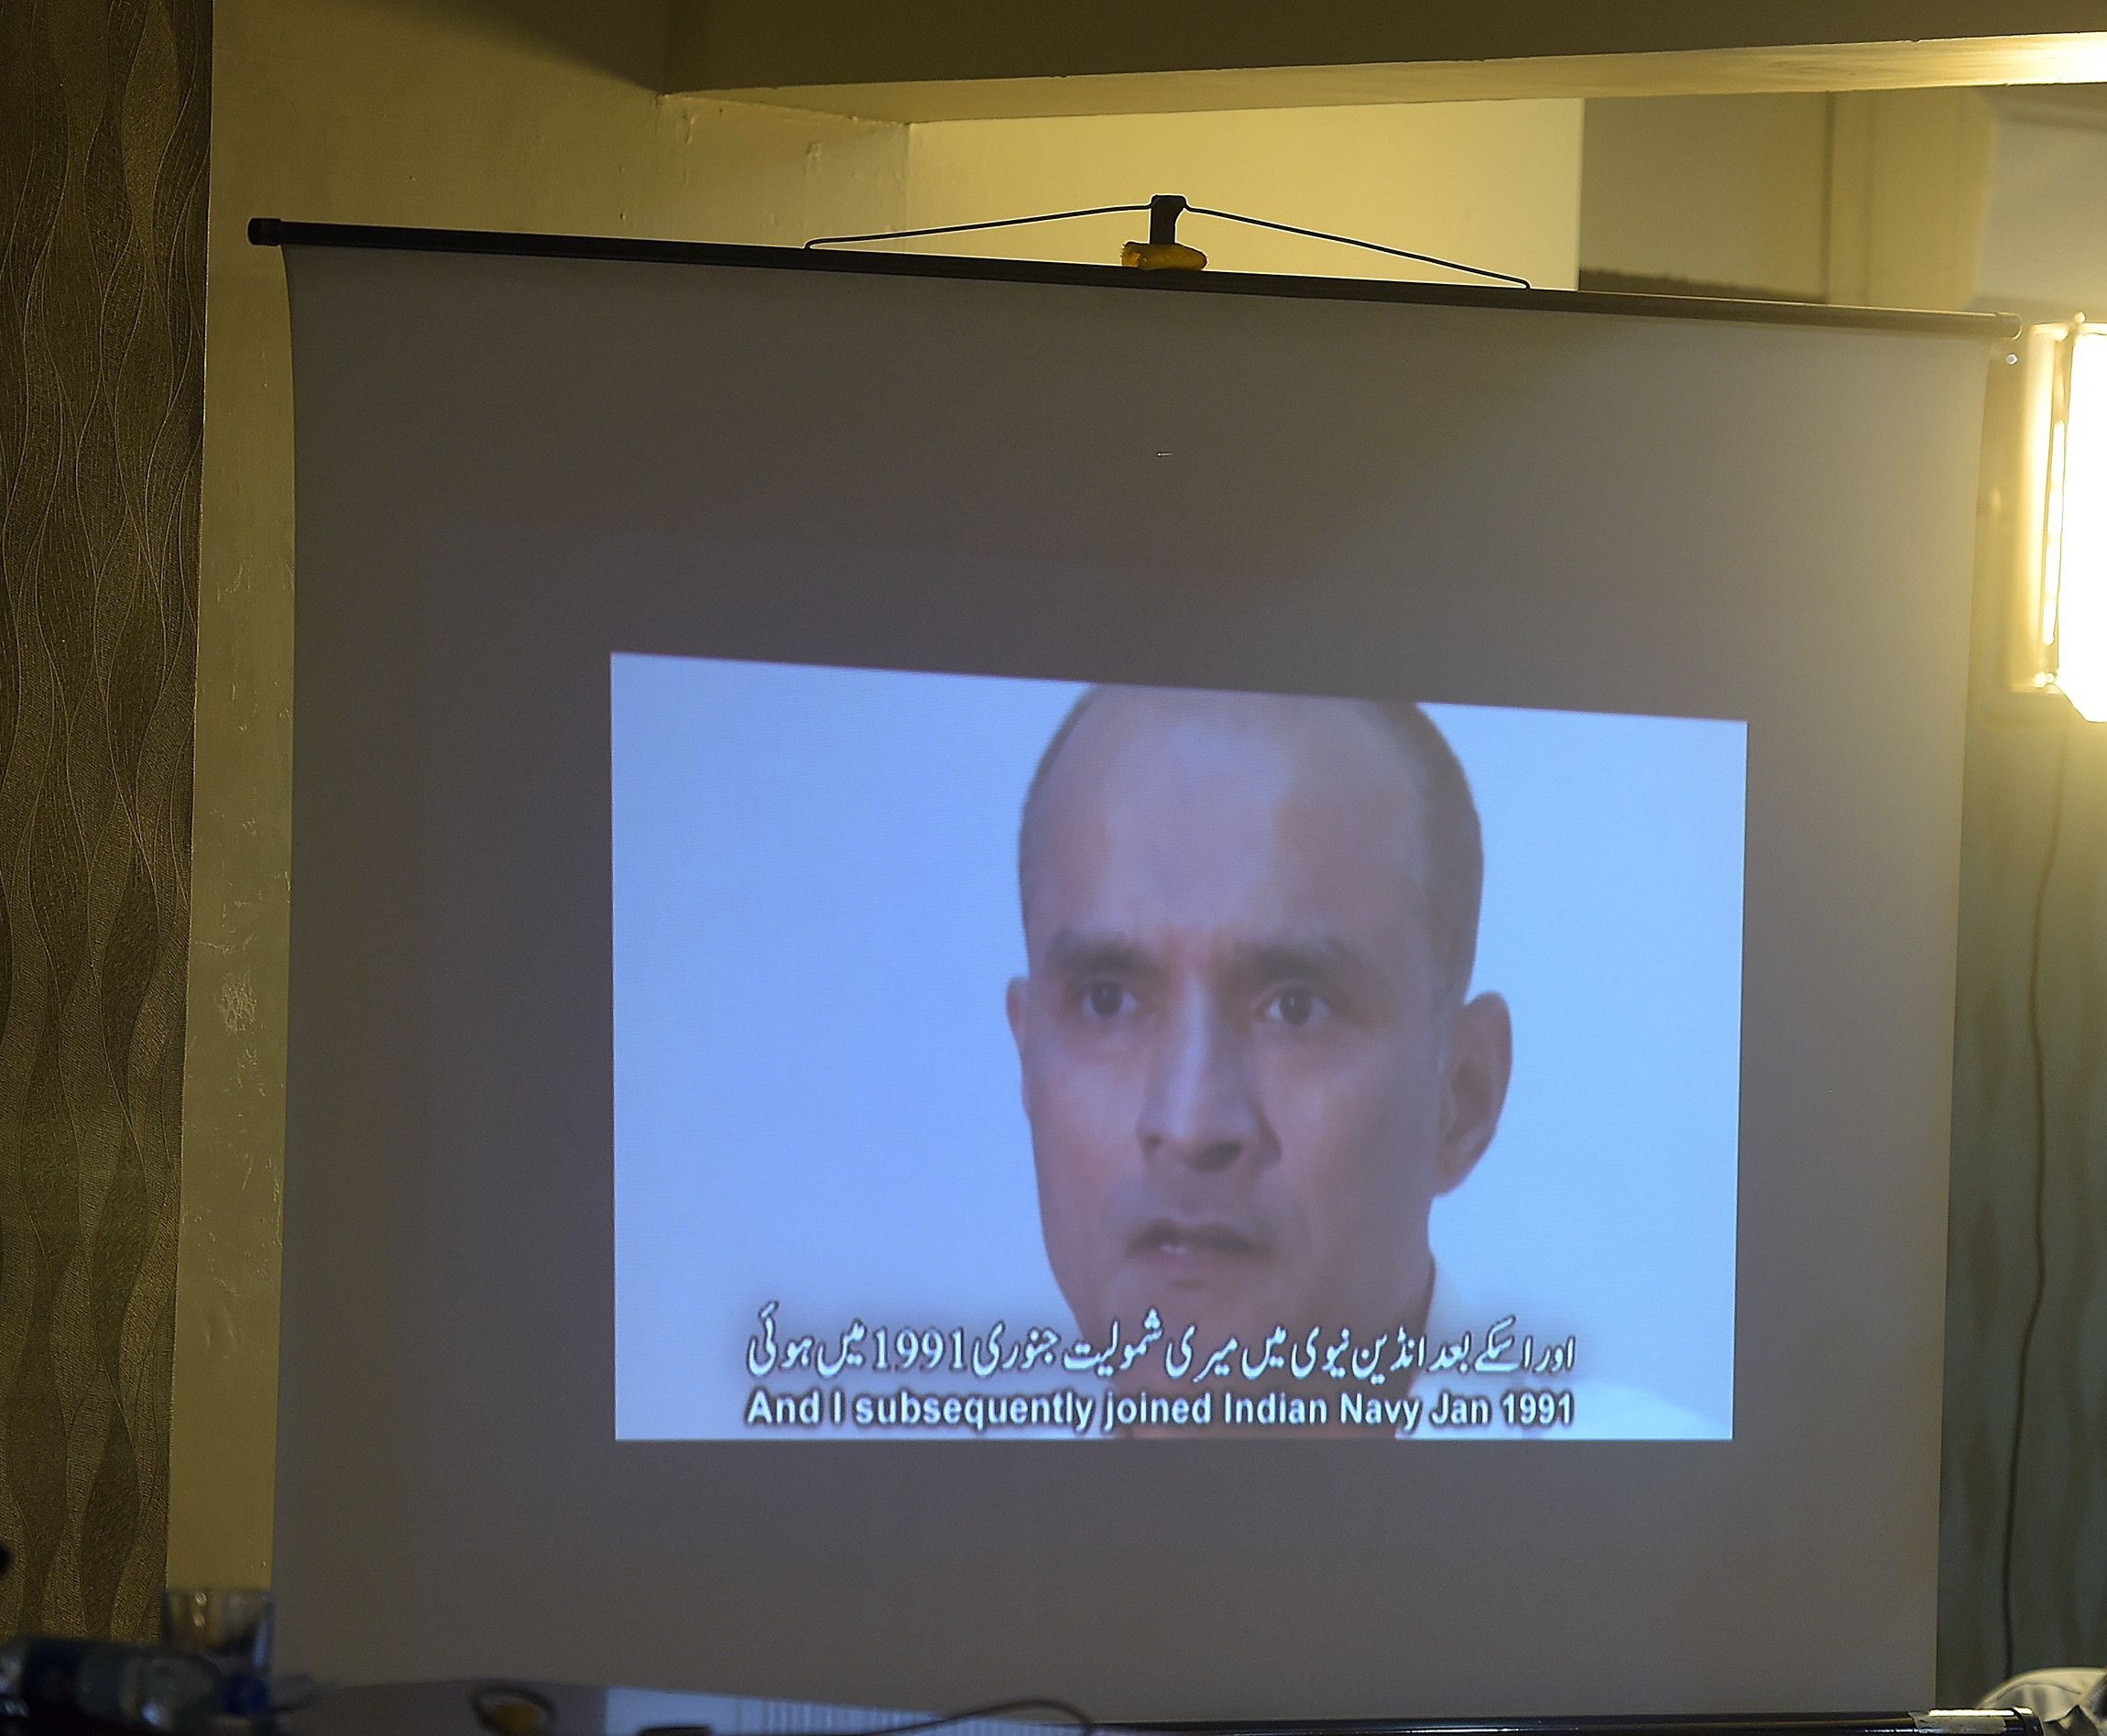 Video shows Kulbhushan Yadav, a portion Indian Navy officer who is suspected of being an Indian spy, during a press discussion in Islamabad on Mar 29, 2016. PHOTO: AFP